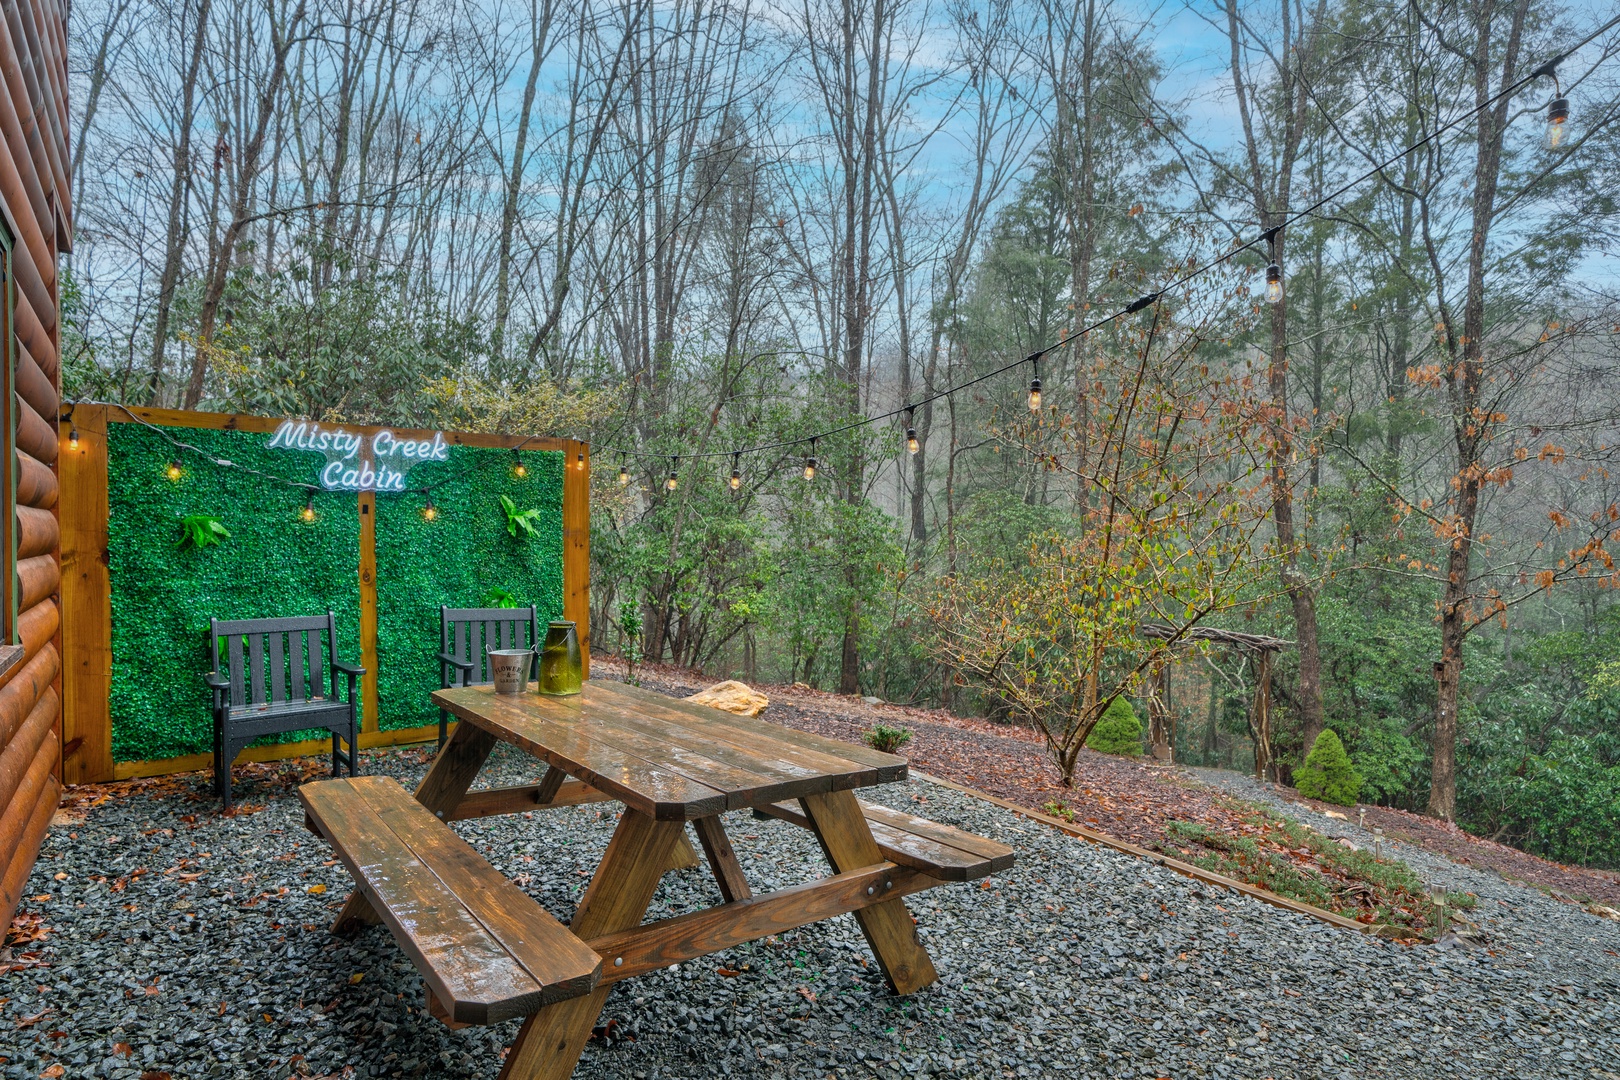 Picnic table area has a view of path to creek